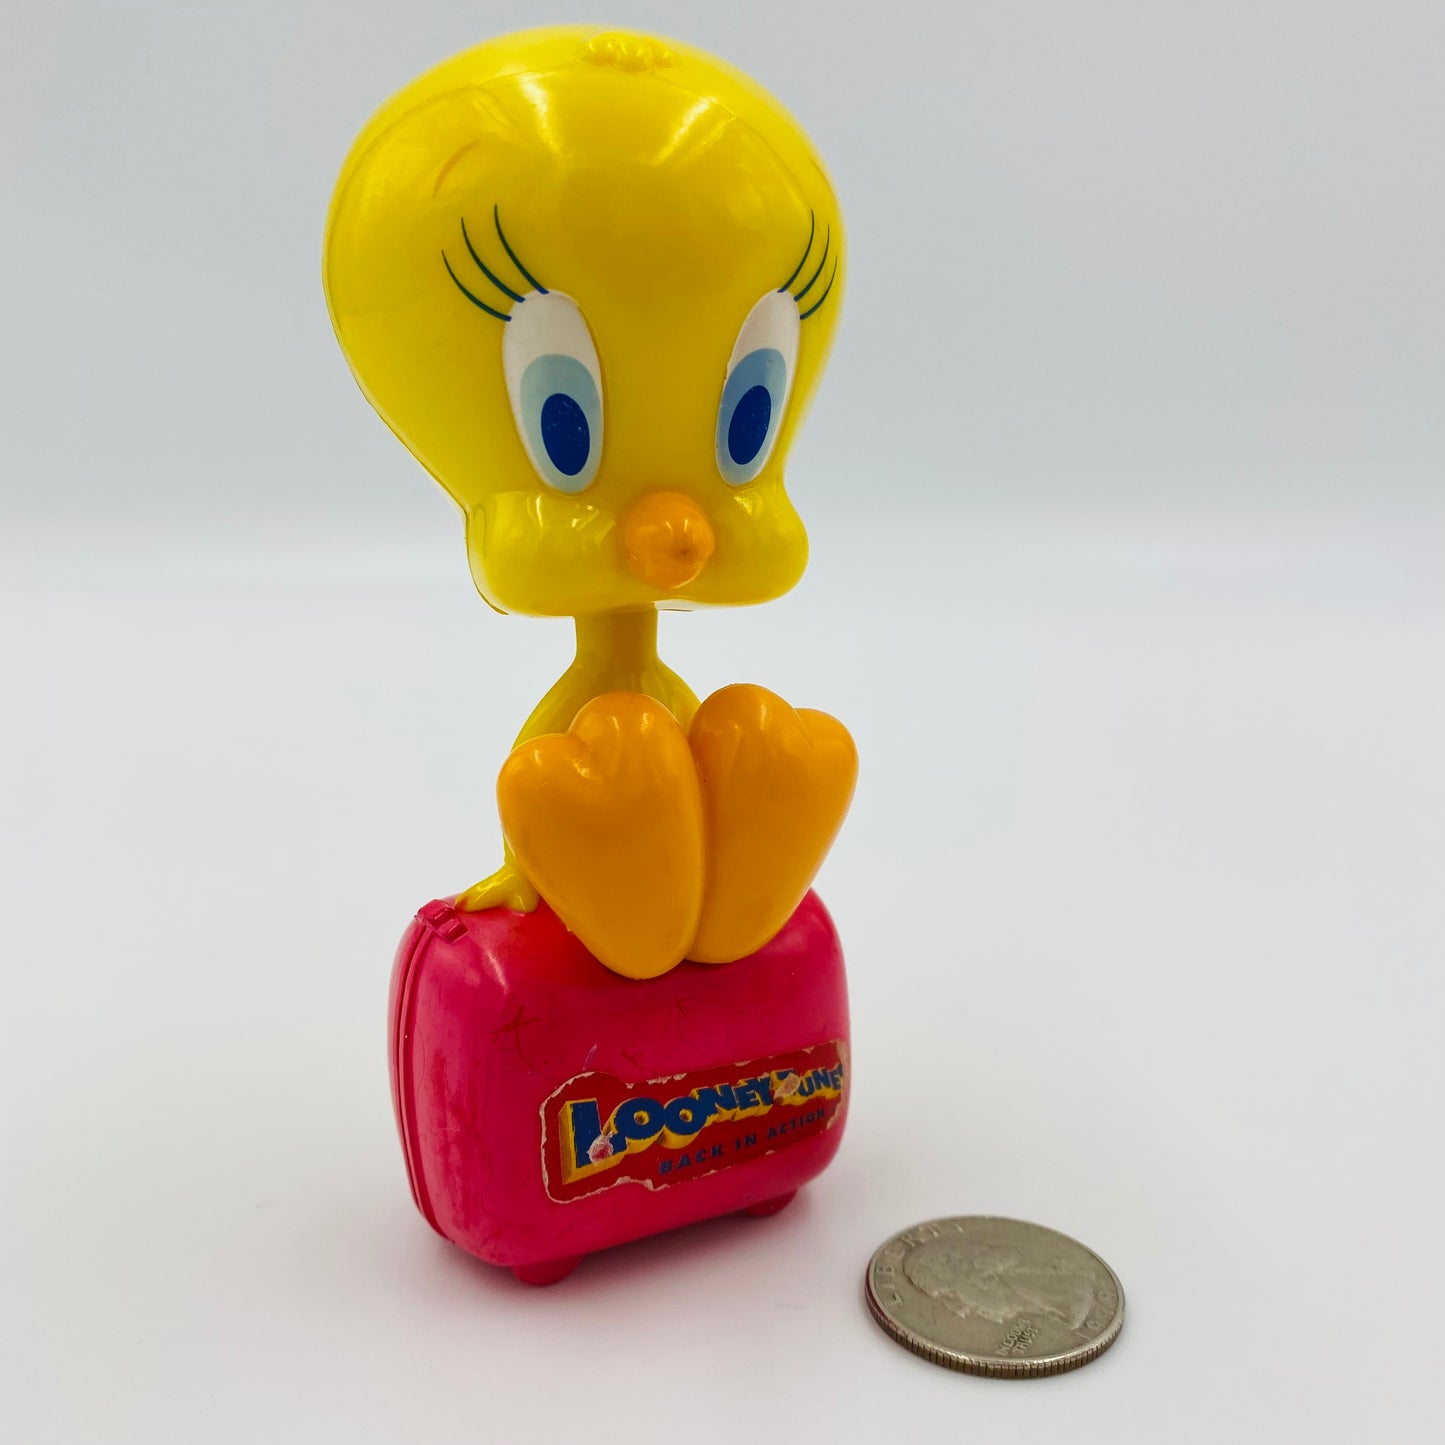 Looney Tunes Back in Action Tweety Bird bobblehead Wendy's Kids' Meal Toy (2003) loose